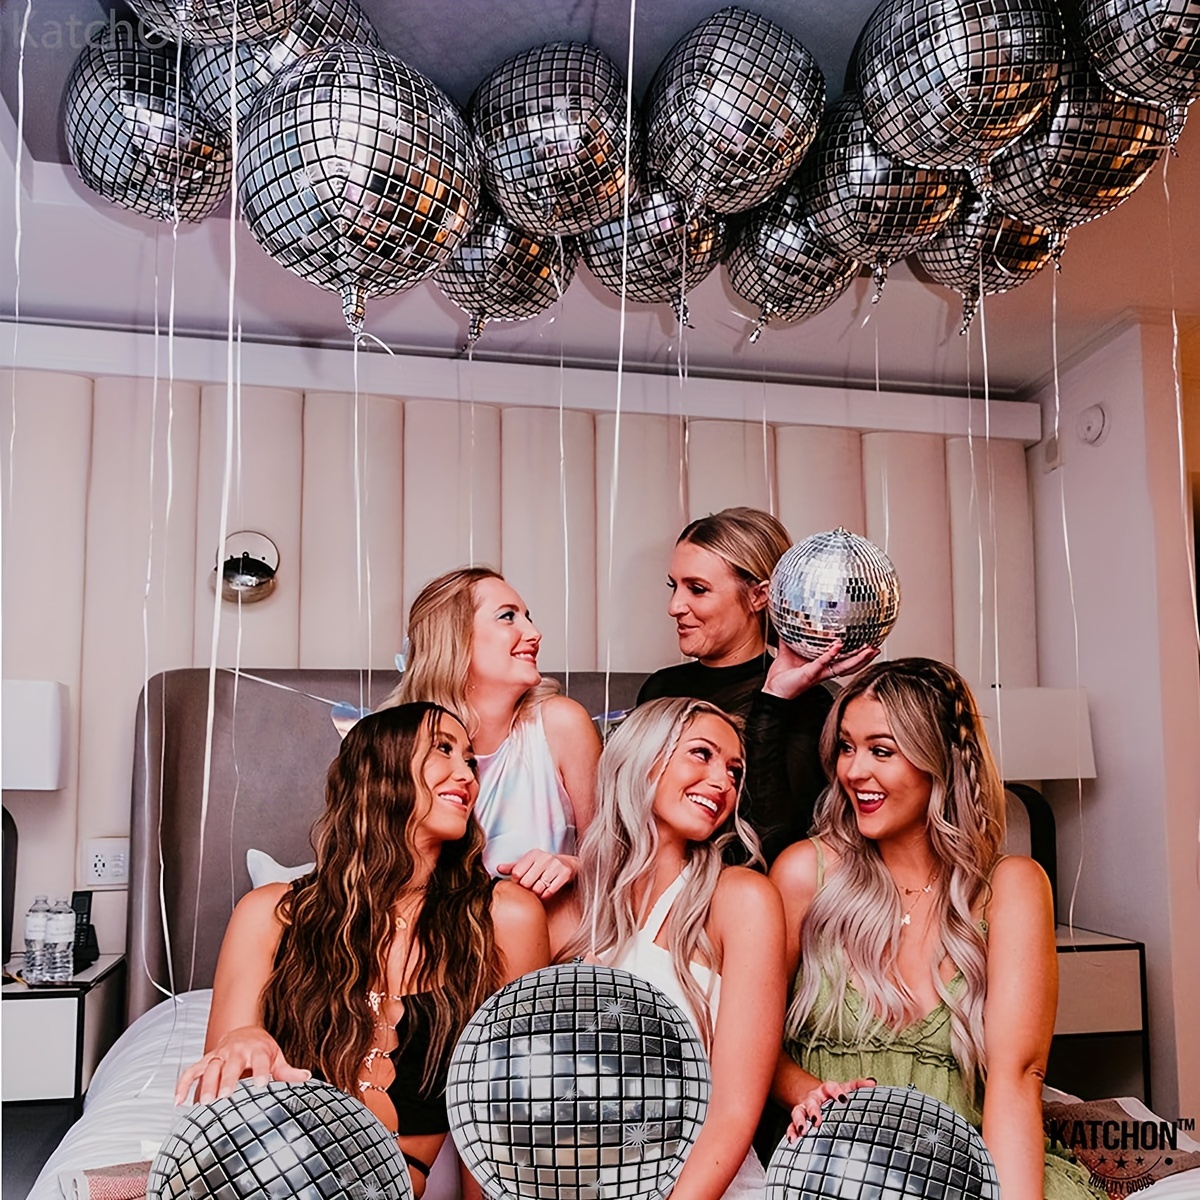 KatchOn, Big Silver Disco Ball Balloons - Pack of 6, Disco Party  Decorations | 4D Sphere Disco Balloons for Disco Bachelorette Party  Decorations 